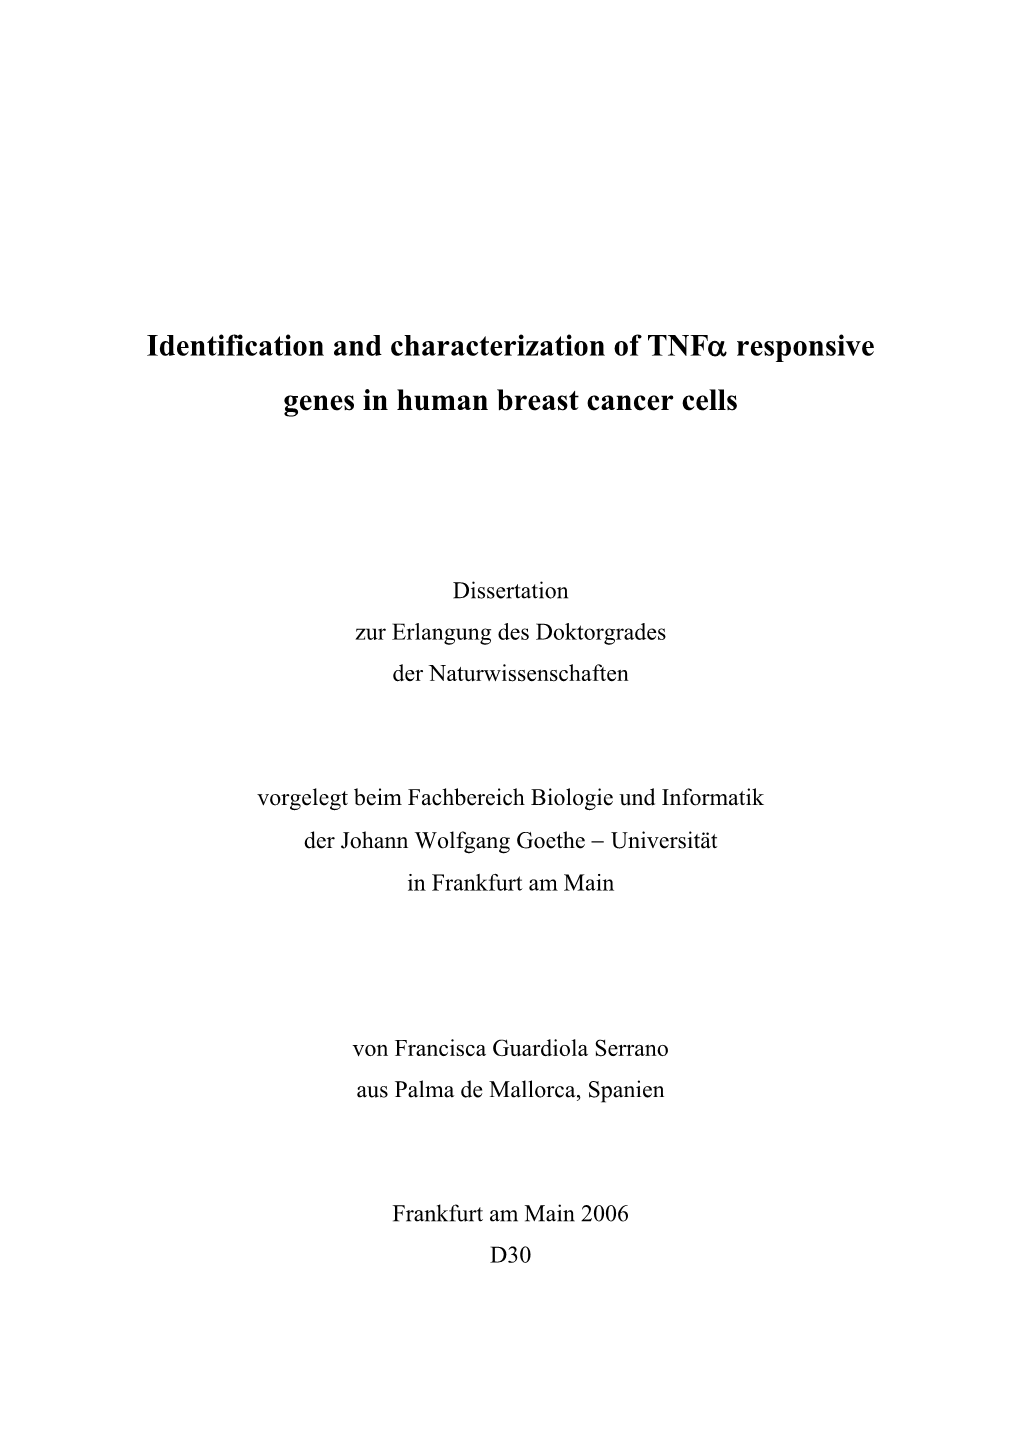 Identification and Characterization of Tnfα Responsive Genes in Human Breast Cancer Cells